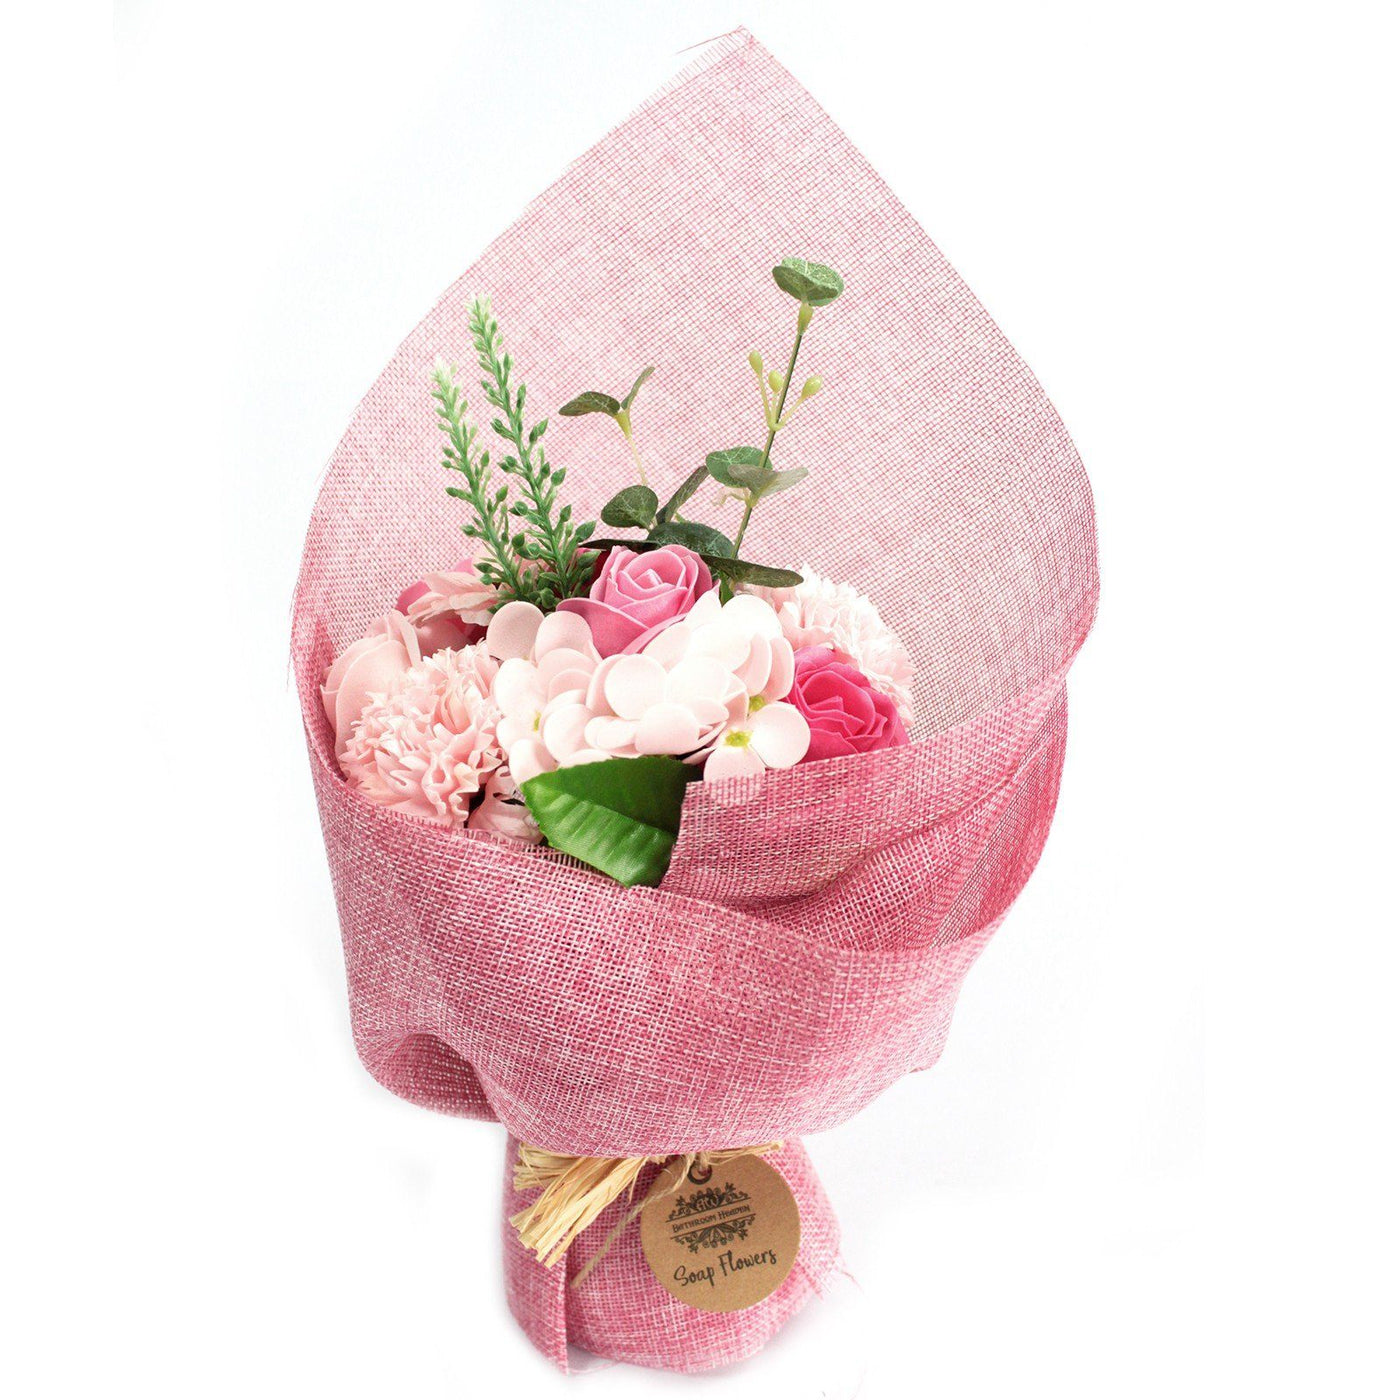 This luxury, beautifully packed standing Pink Soap Flowers Bouquet are a perfect gift, wedding favours, Valentine gift, Birthday gift or a little treat for yourself. 